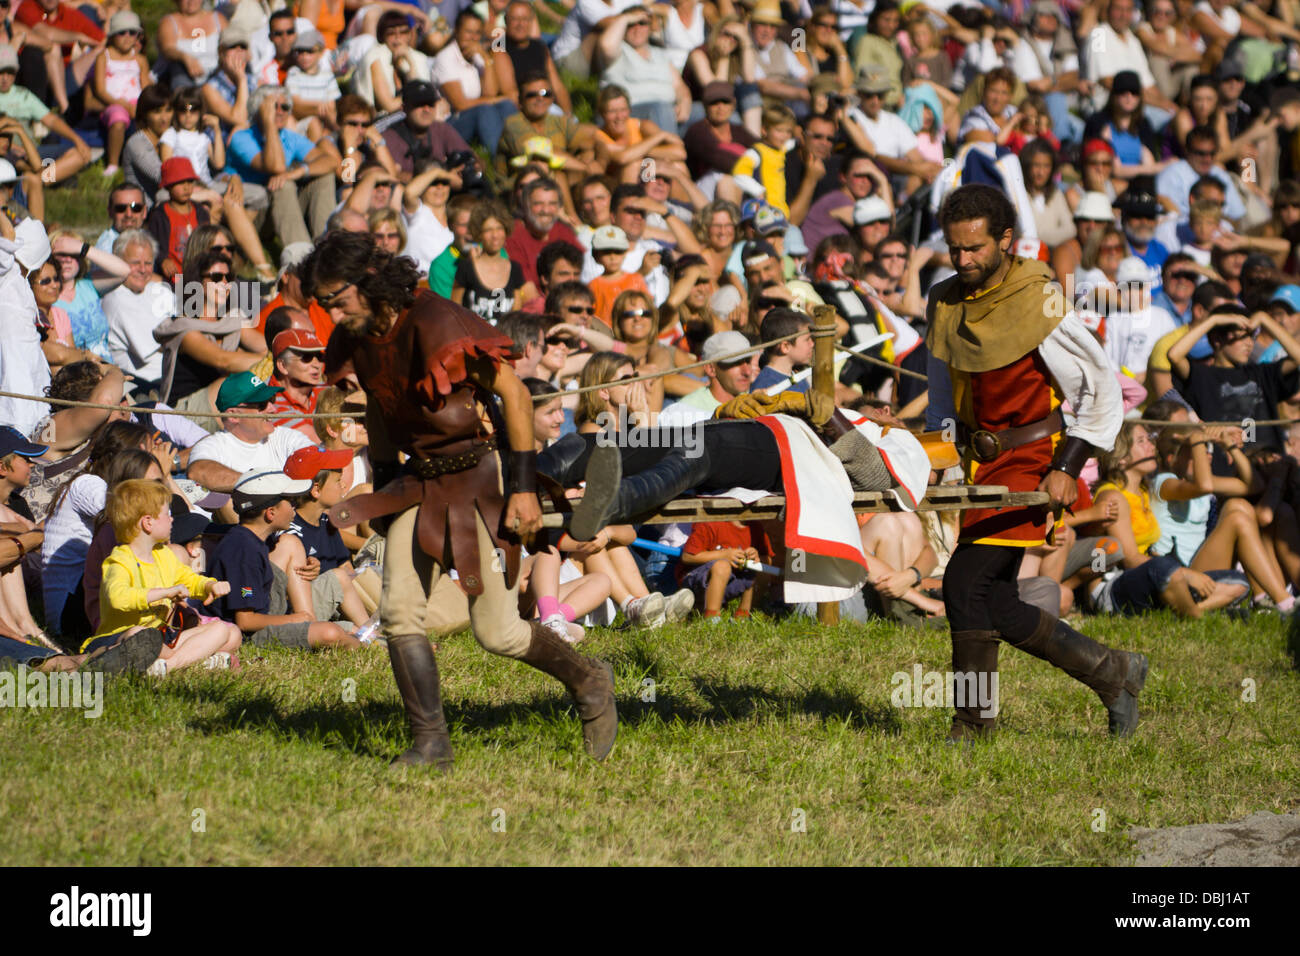 Wounded knight is carried on a stretcher at a French Mediaeval Fayre Stock Photo